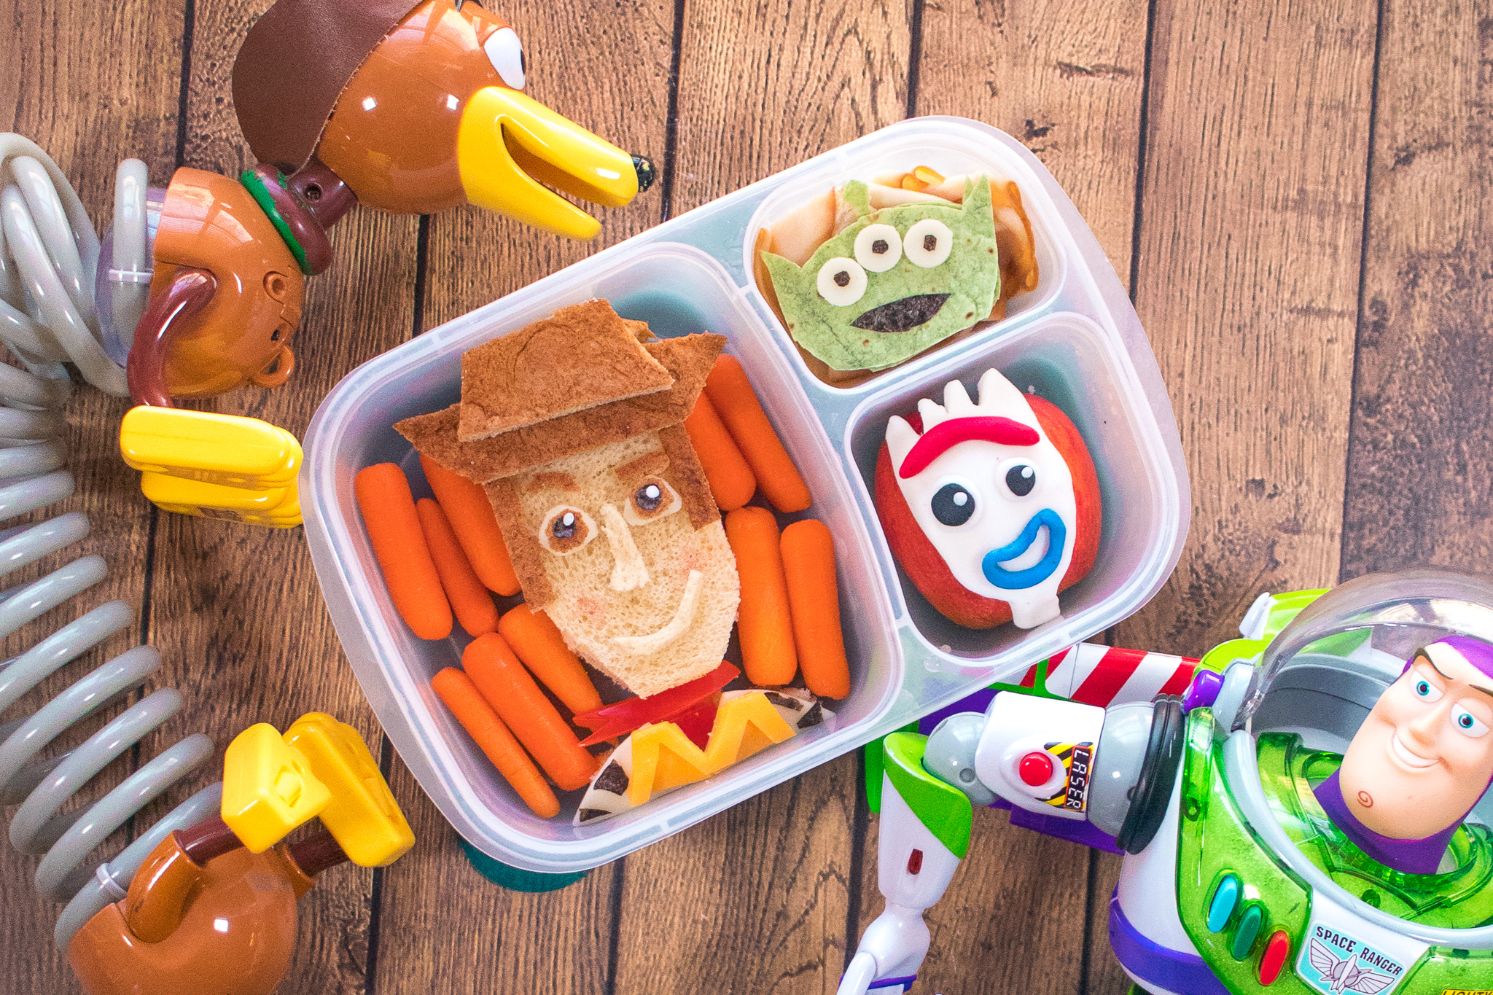 Toy Story Lunch Box 